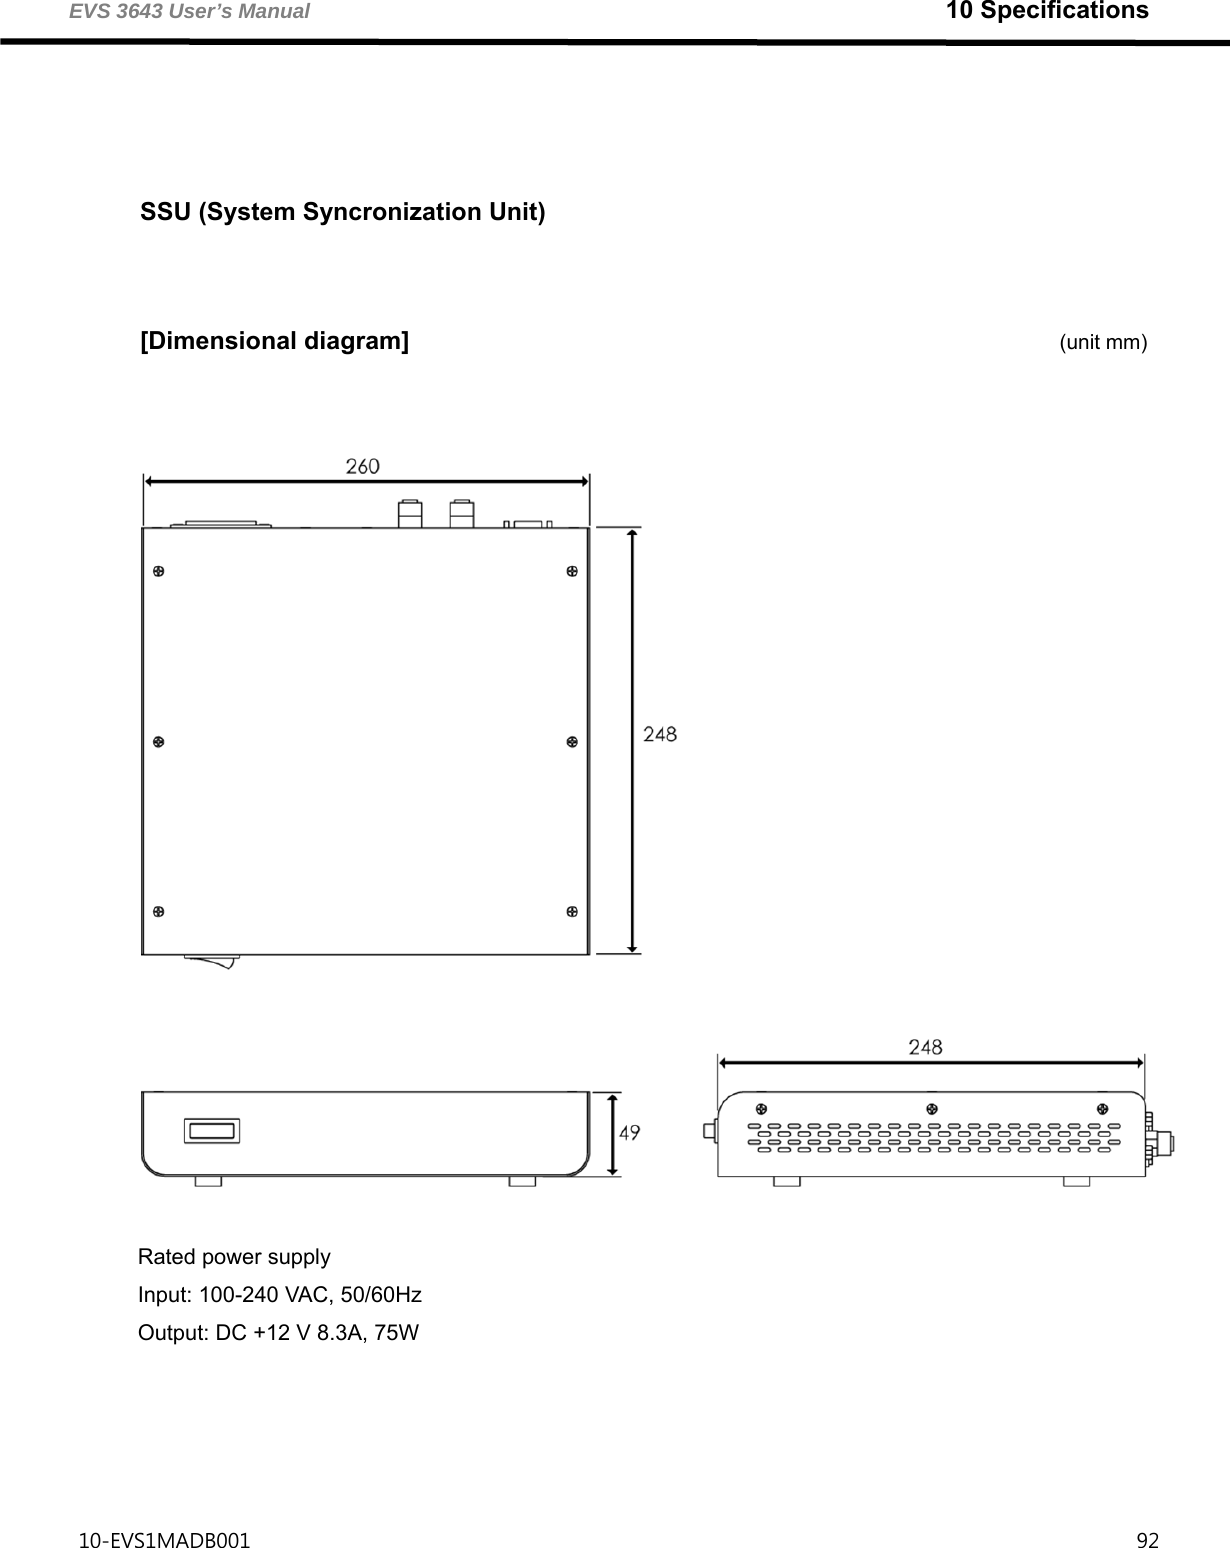 EVS 3643 User’s Manual                                                             10 Specifications 10-EVS1MADB001                                                                                     92     SSU (System Syncronization Unit)         [Dimensional diagram]                                                    (unit mm)     Rated power supply Input: 100-240 VAC, 50/60Hz   Output: DC +12 V 8.3A, 75W  